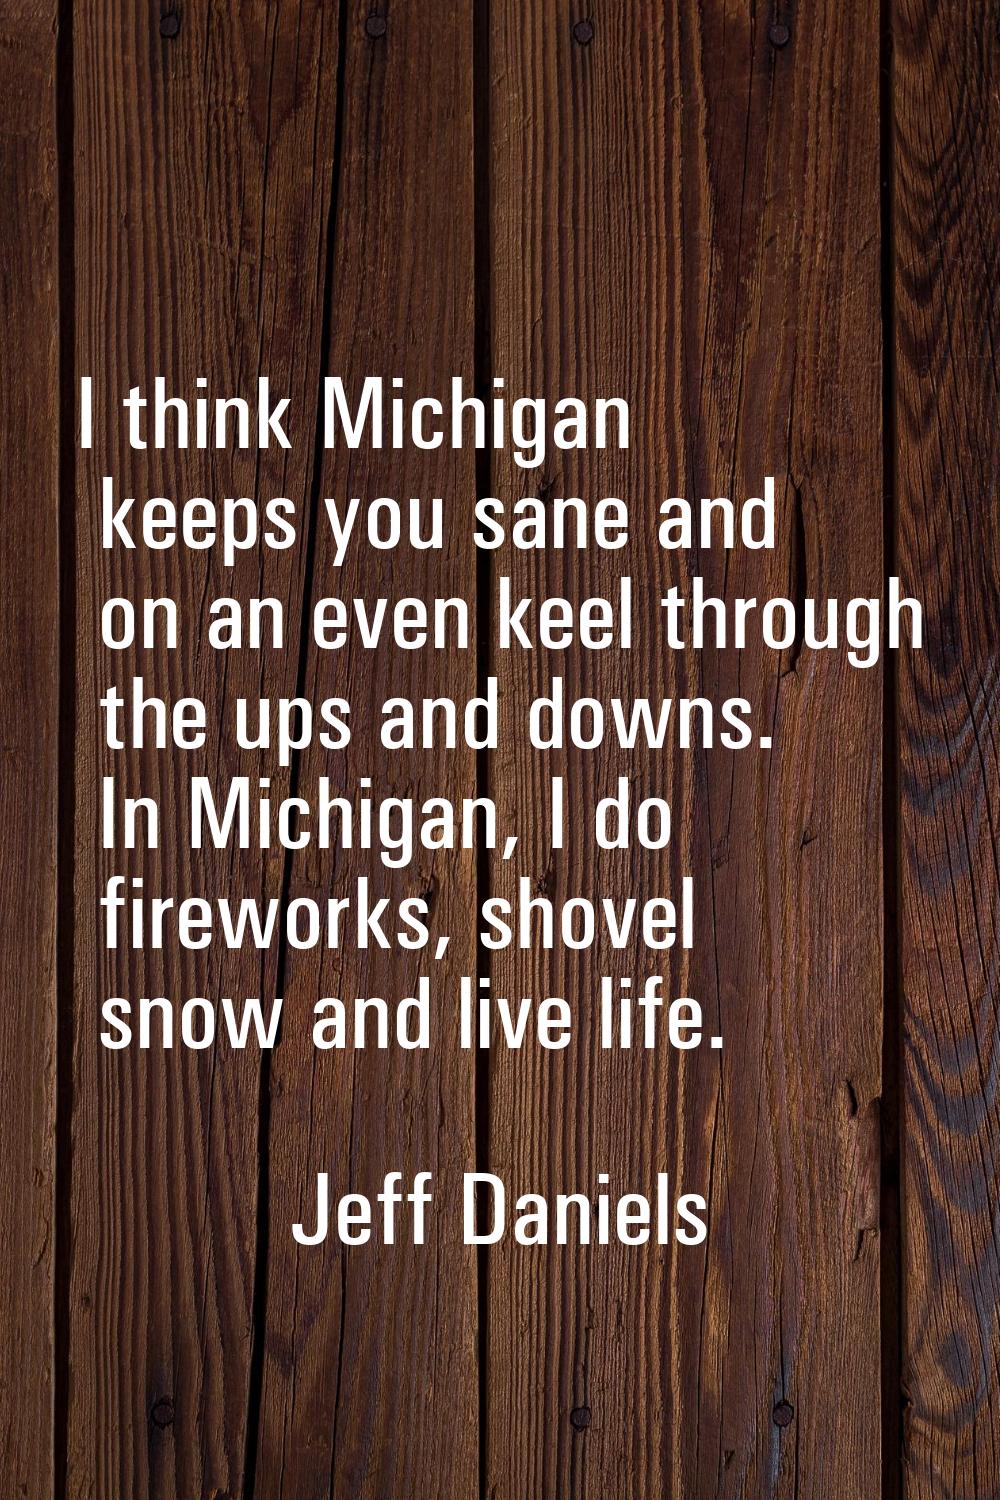 I think Michigan keeps you sane and on an even keel through the ups and downs. In Michigan, I do fi